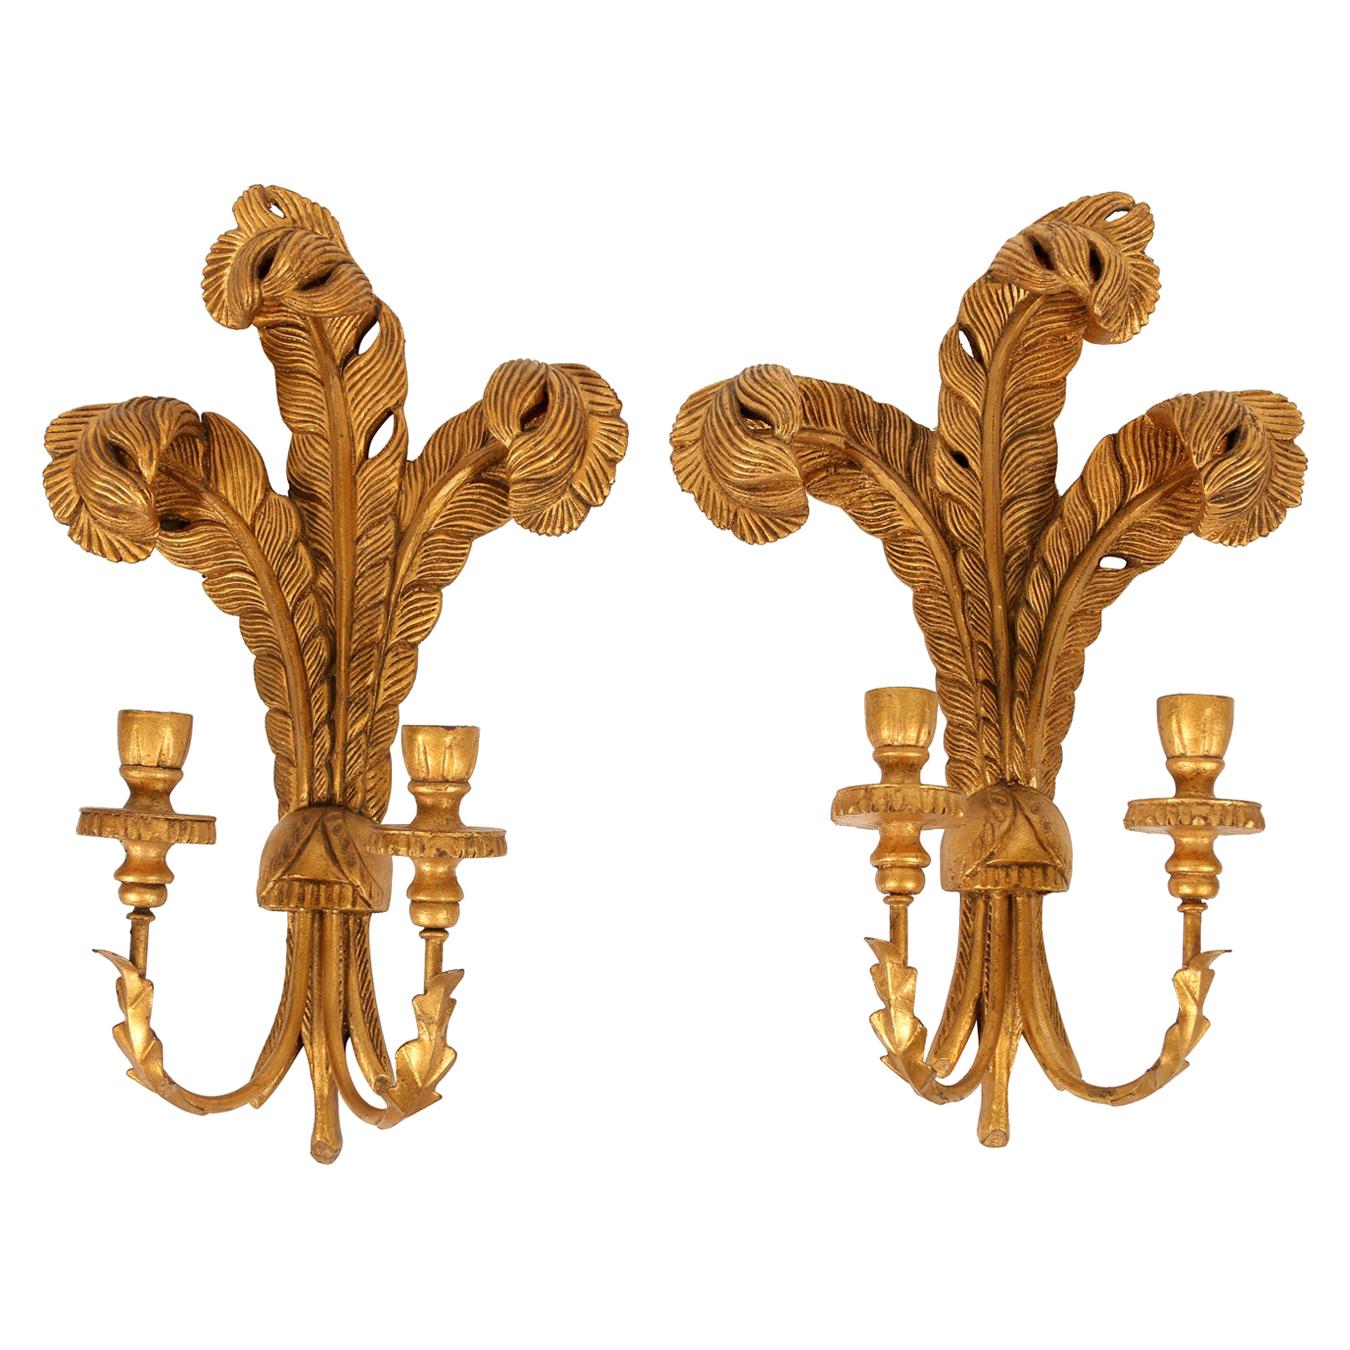 Pair of Giltwood "Prince of Wales" Candle Sconces